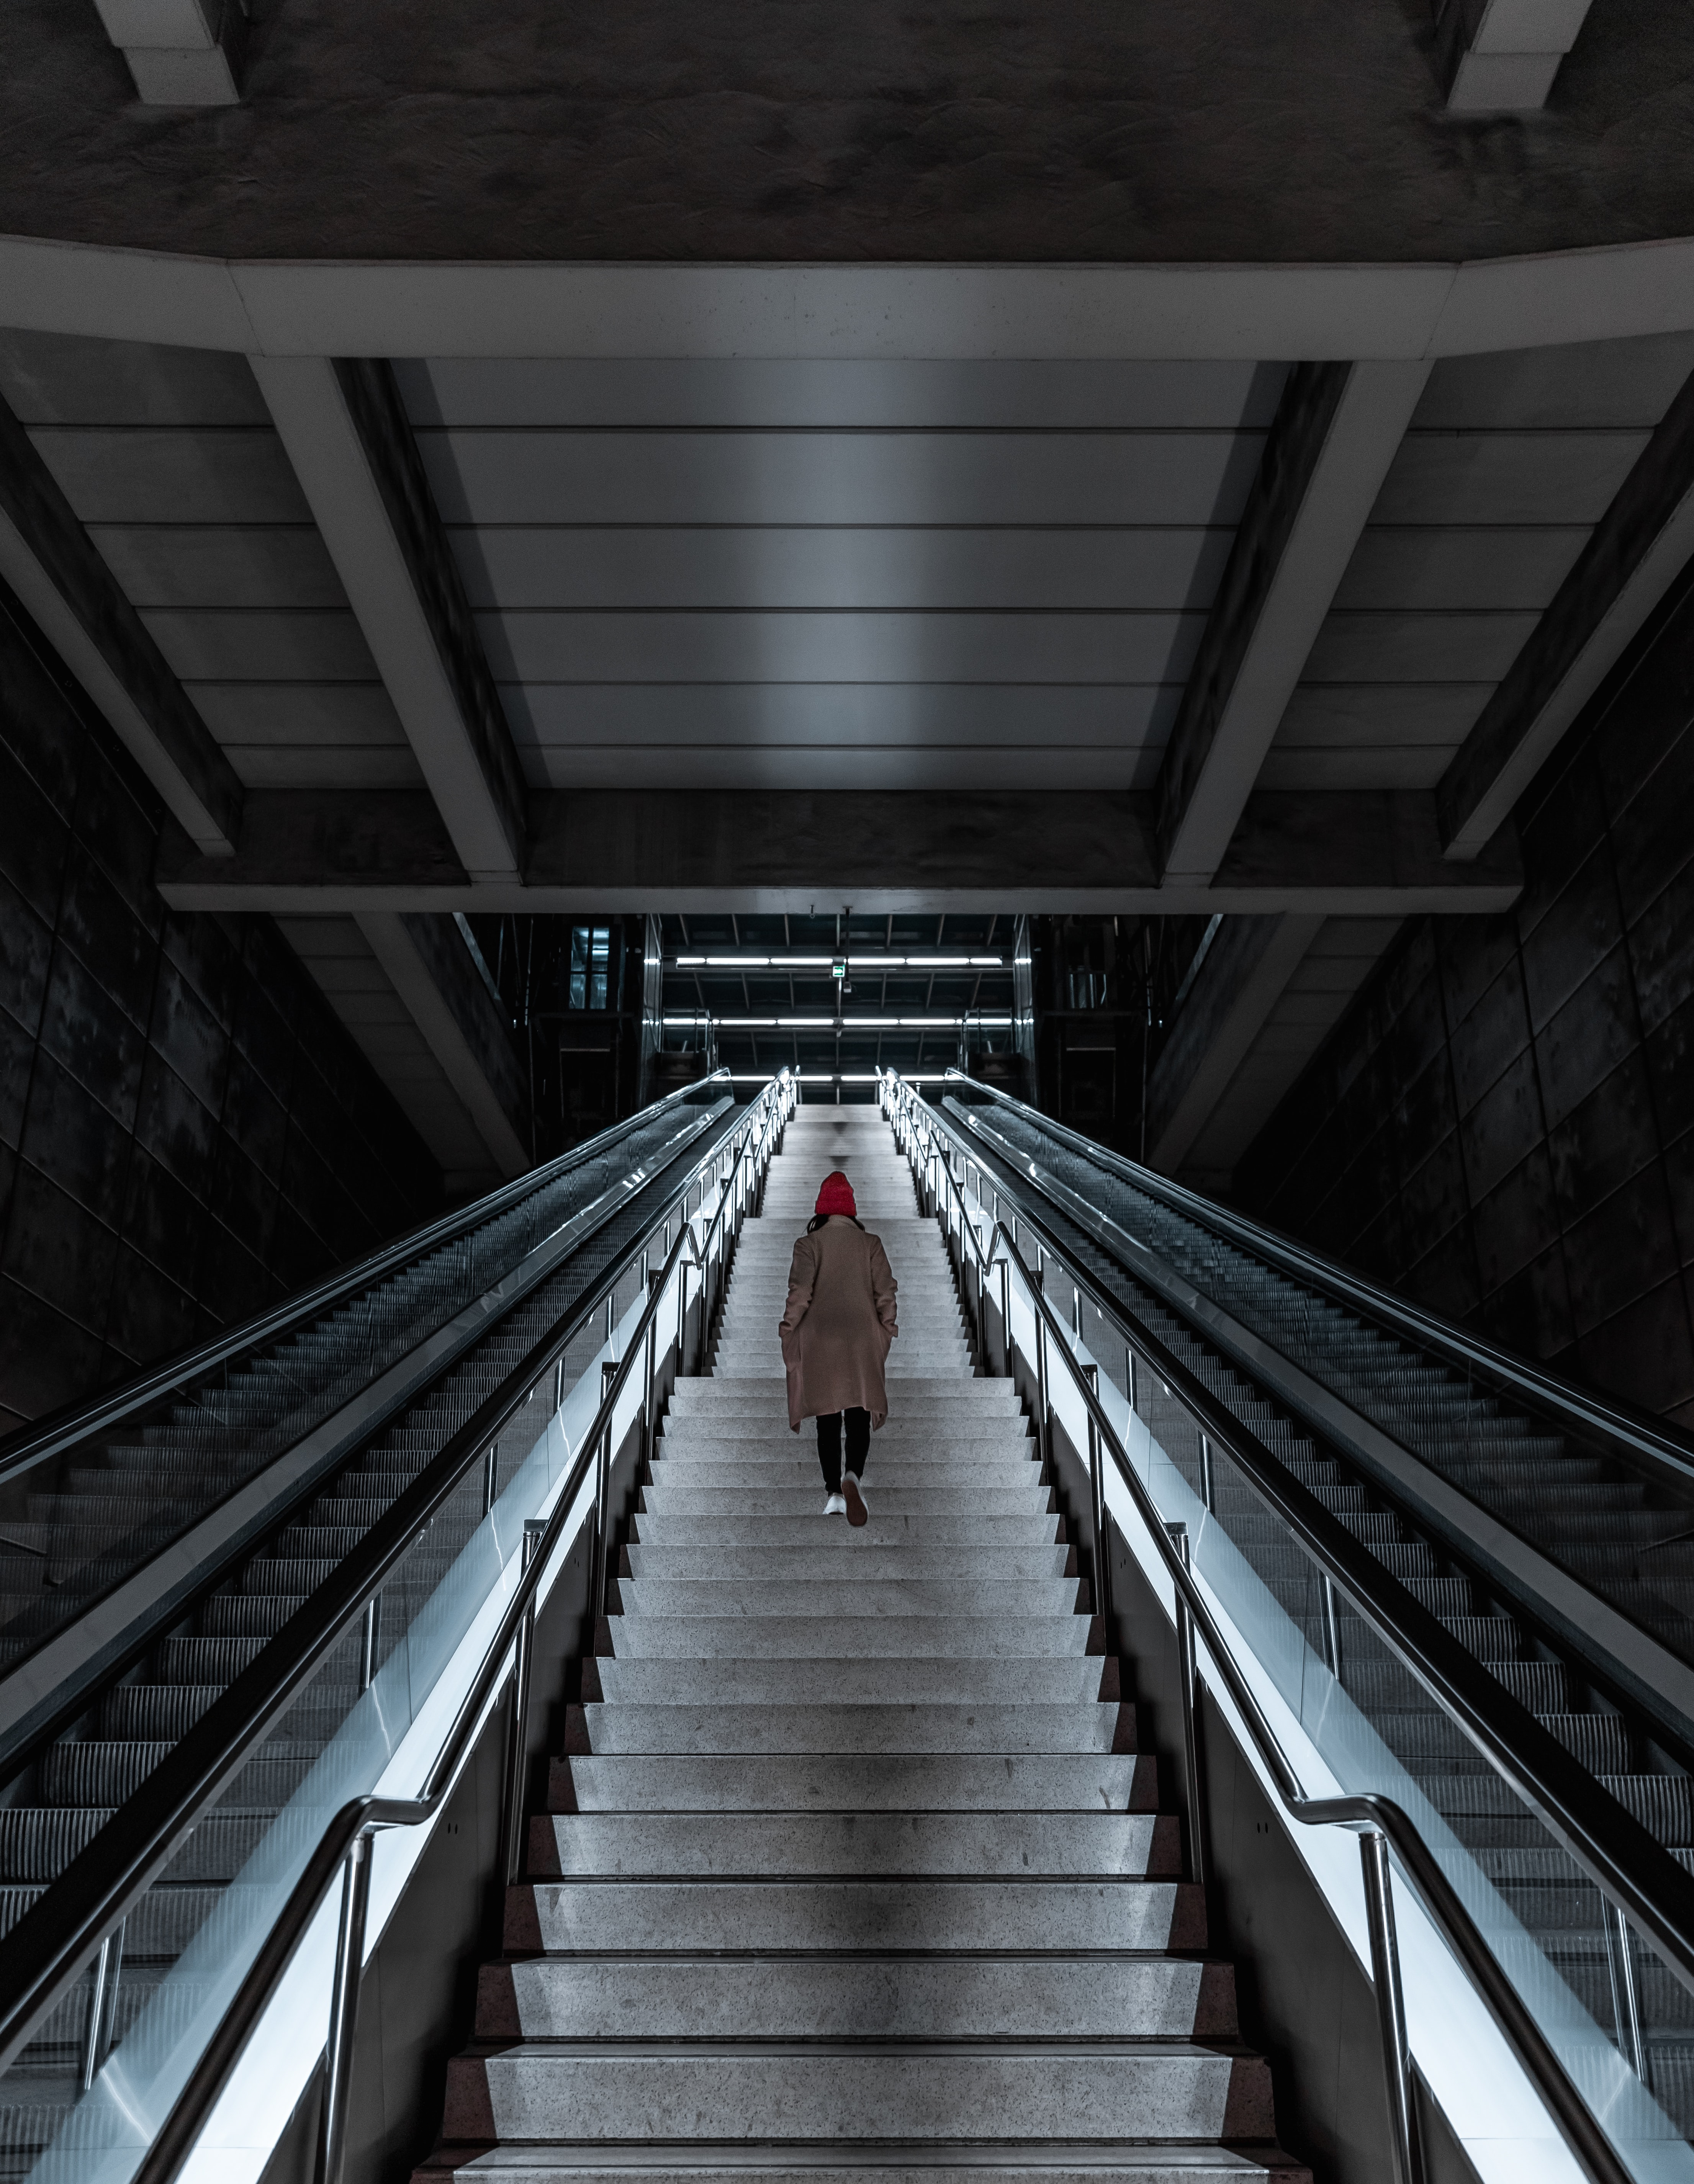 Free download wallpaper Miscellanea, Miscellaneous, Ladder, Subway, Stairs, Loneliness, Metro, Girl on your PC desktop